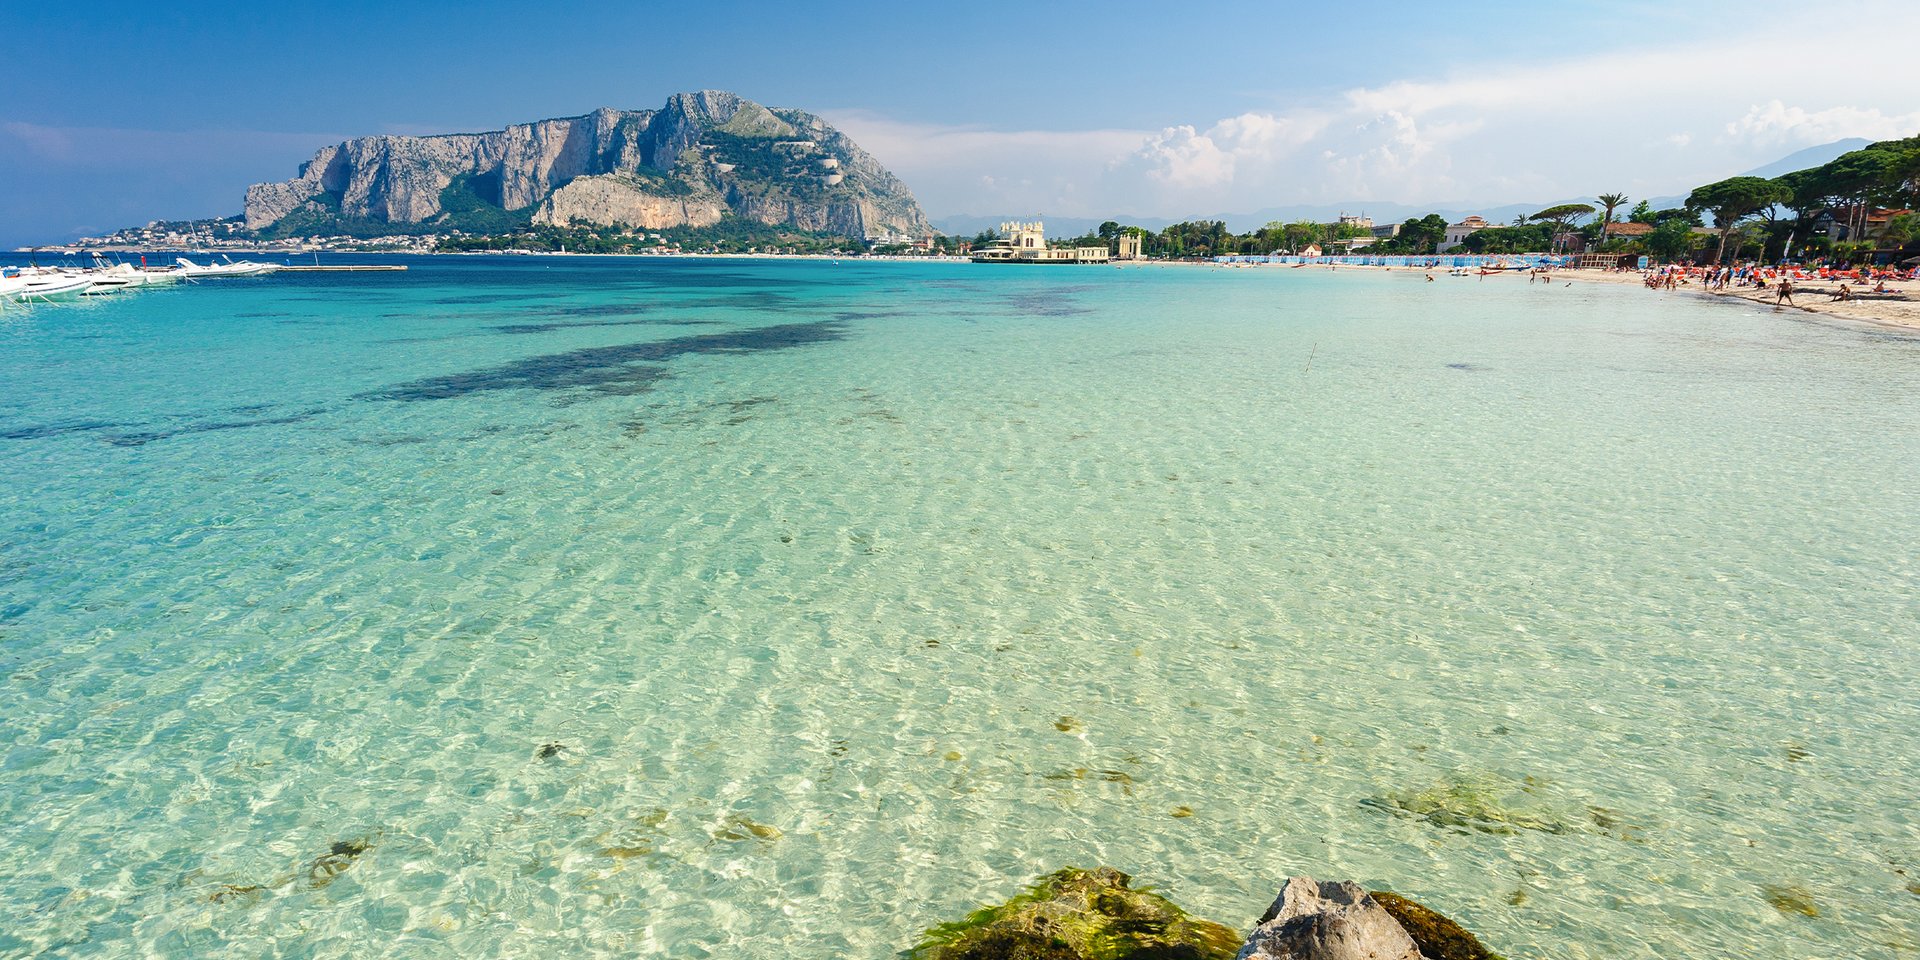 Sicily makes the perfect center point for a Mediterranean yachting adventure.